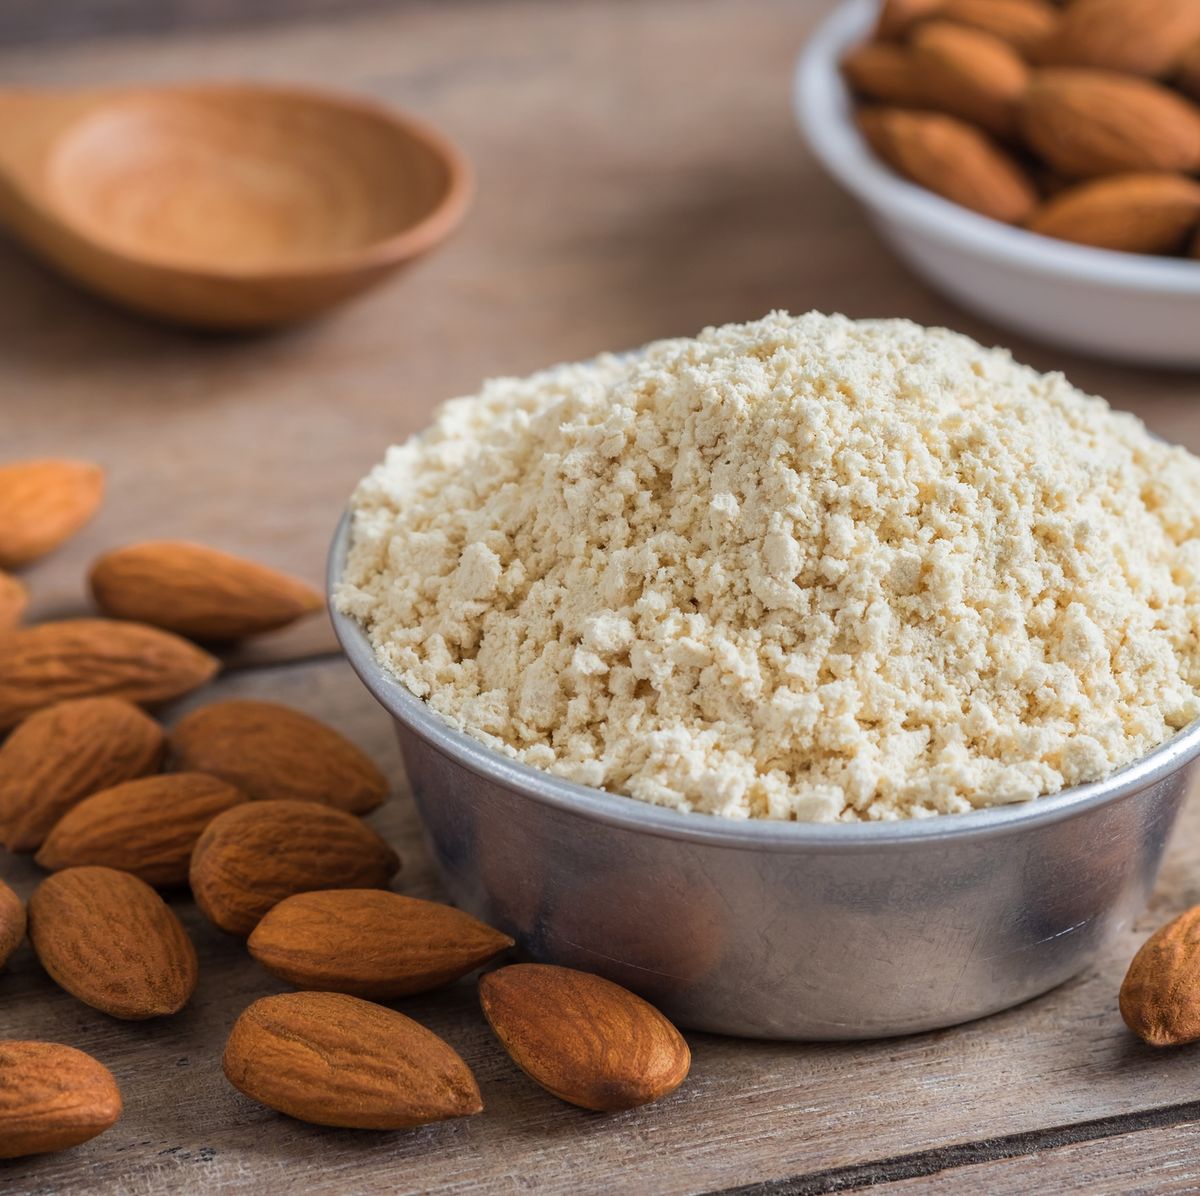 A Overview of the Health Benefits of Almond Flour